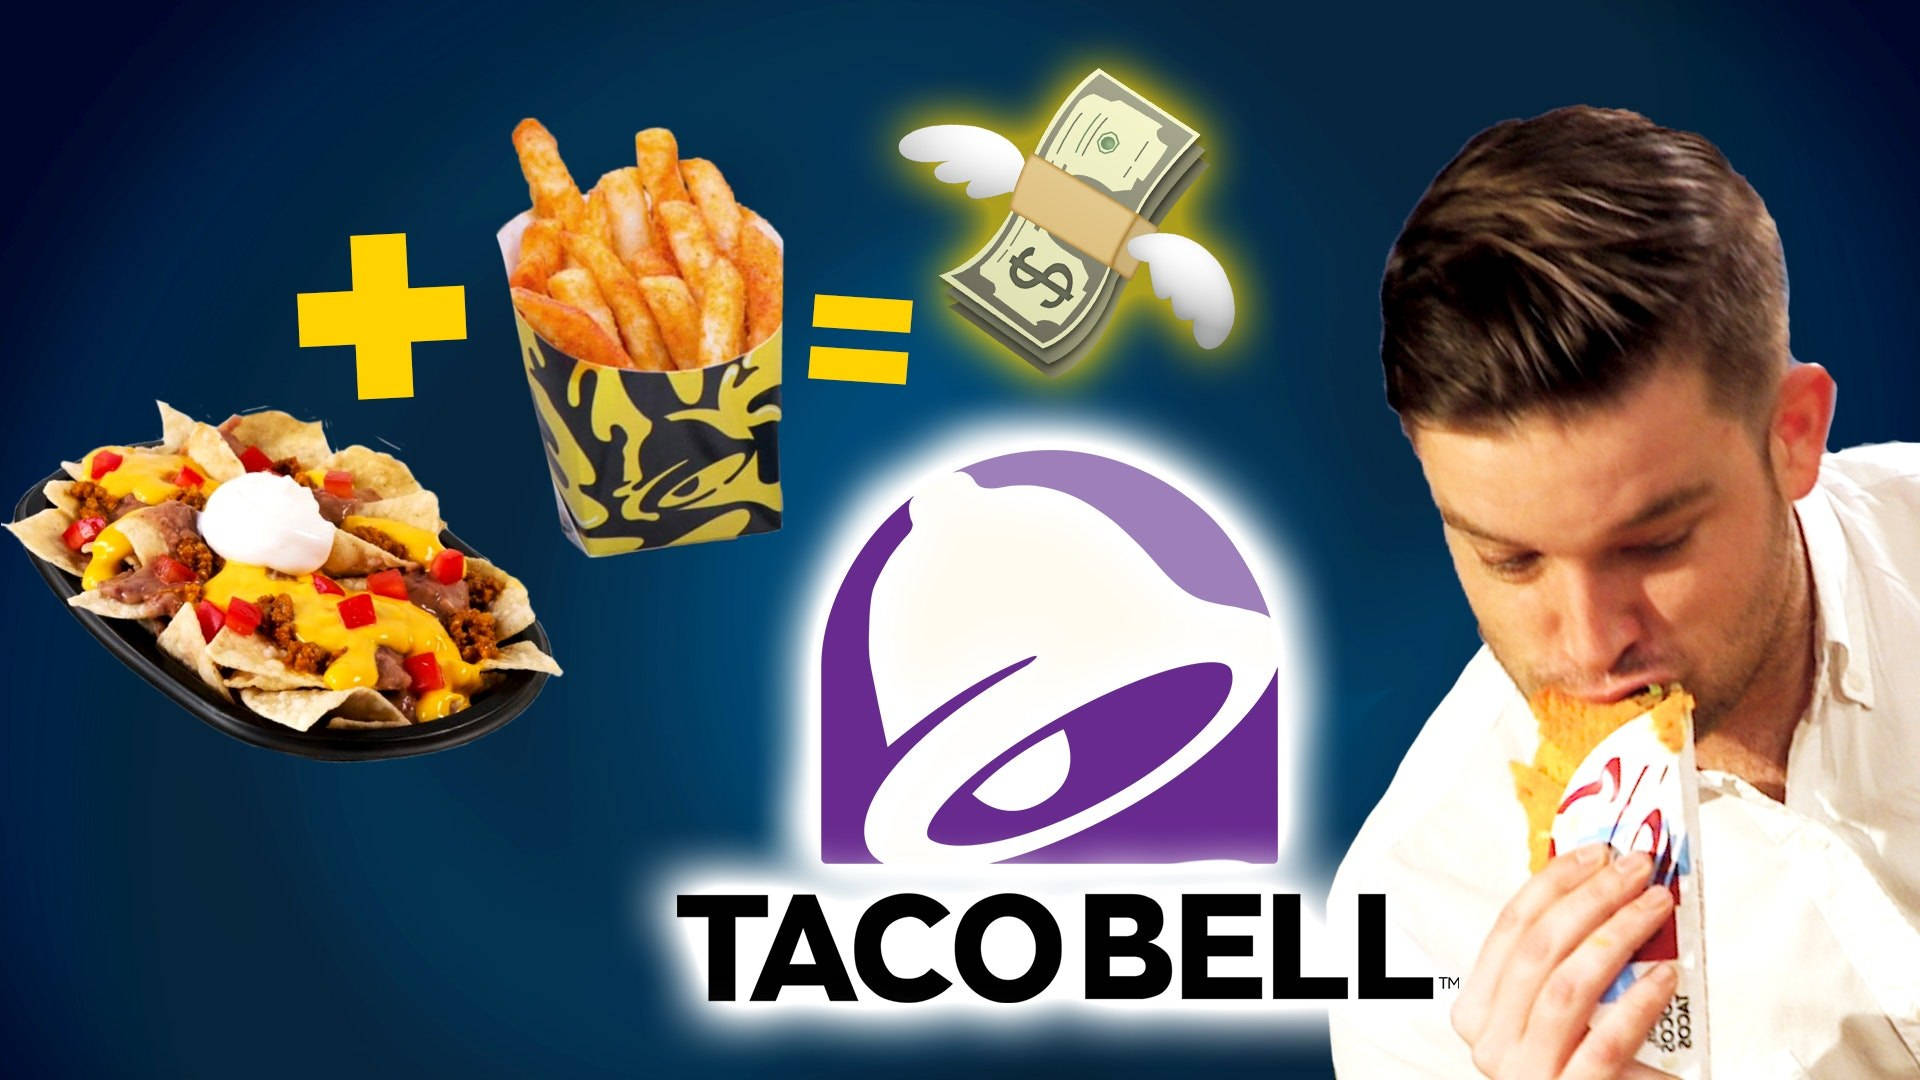 Taco Bell Funny Poster Background